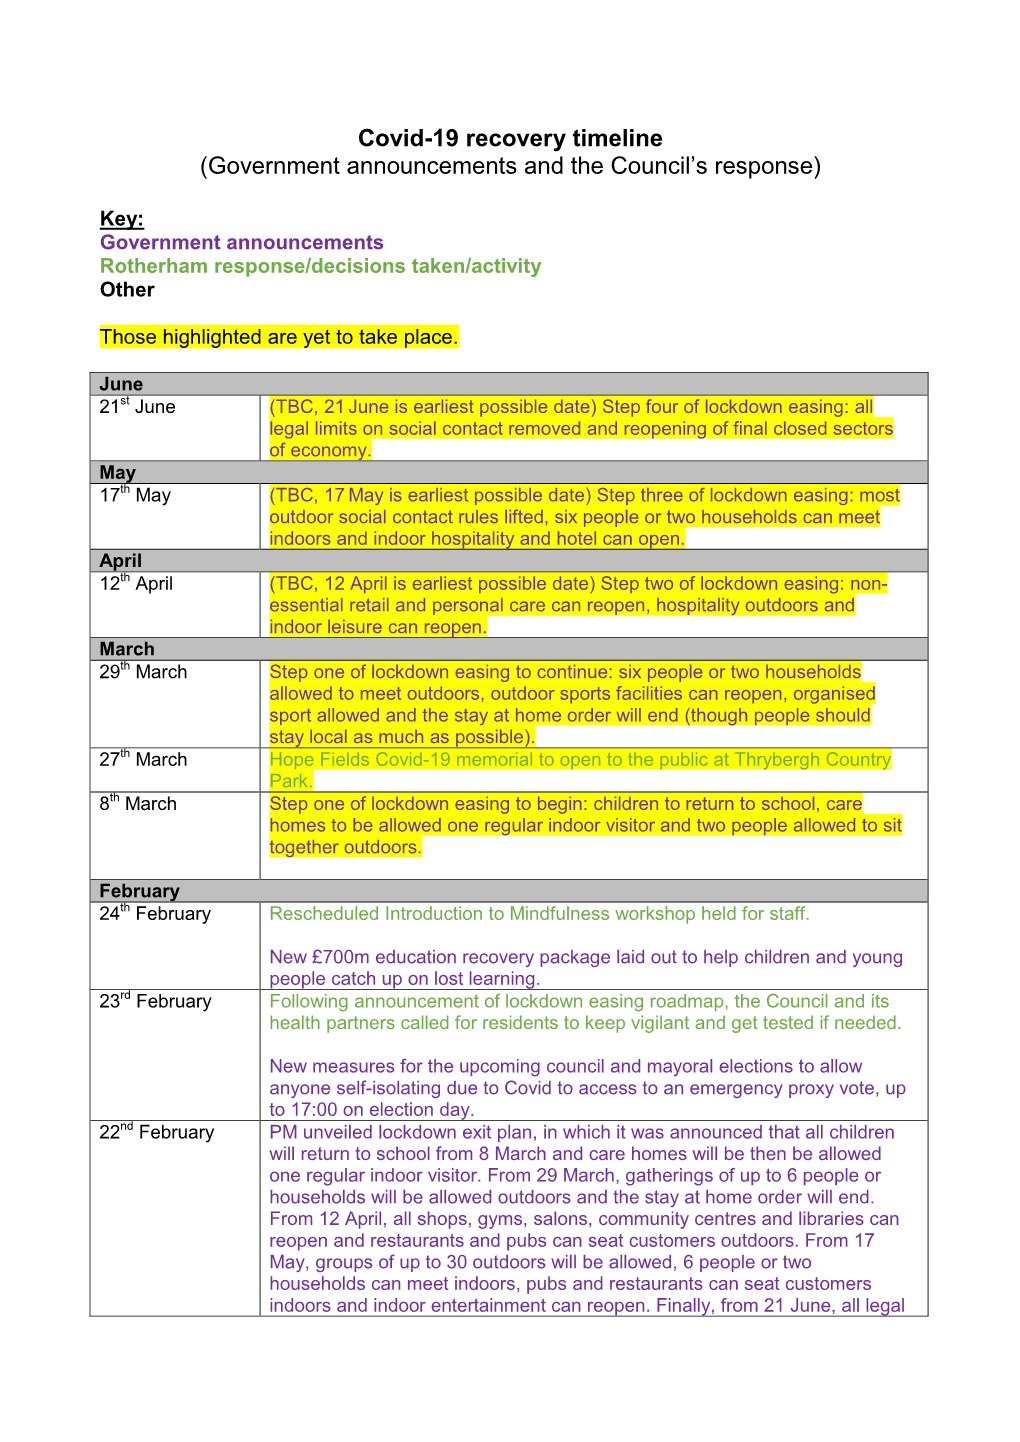 Covid-19 Recovery Timeline (Government Announcements and the Council’S Response)